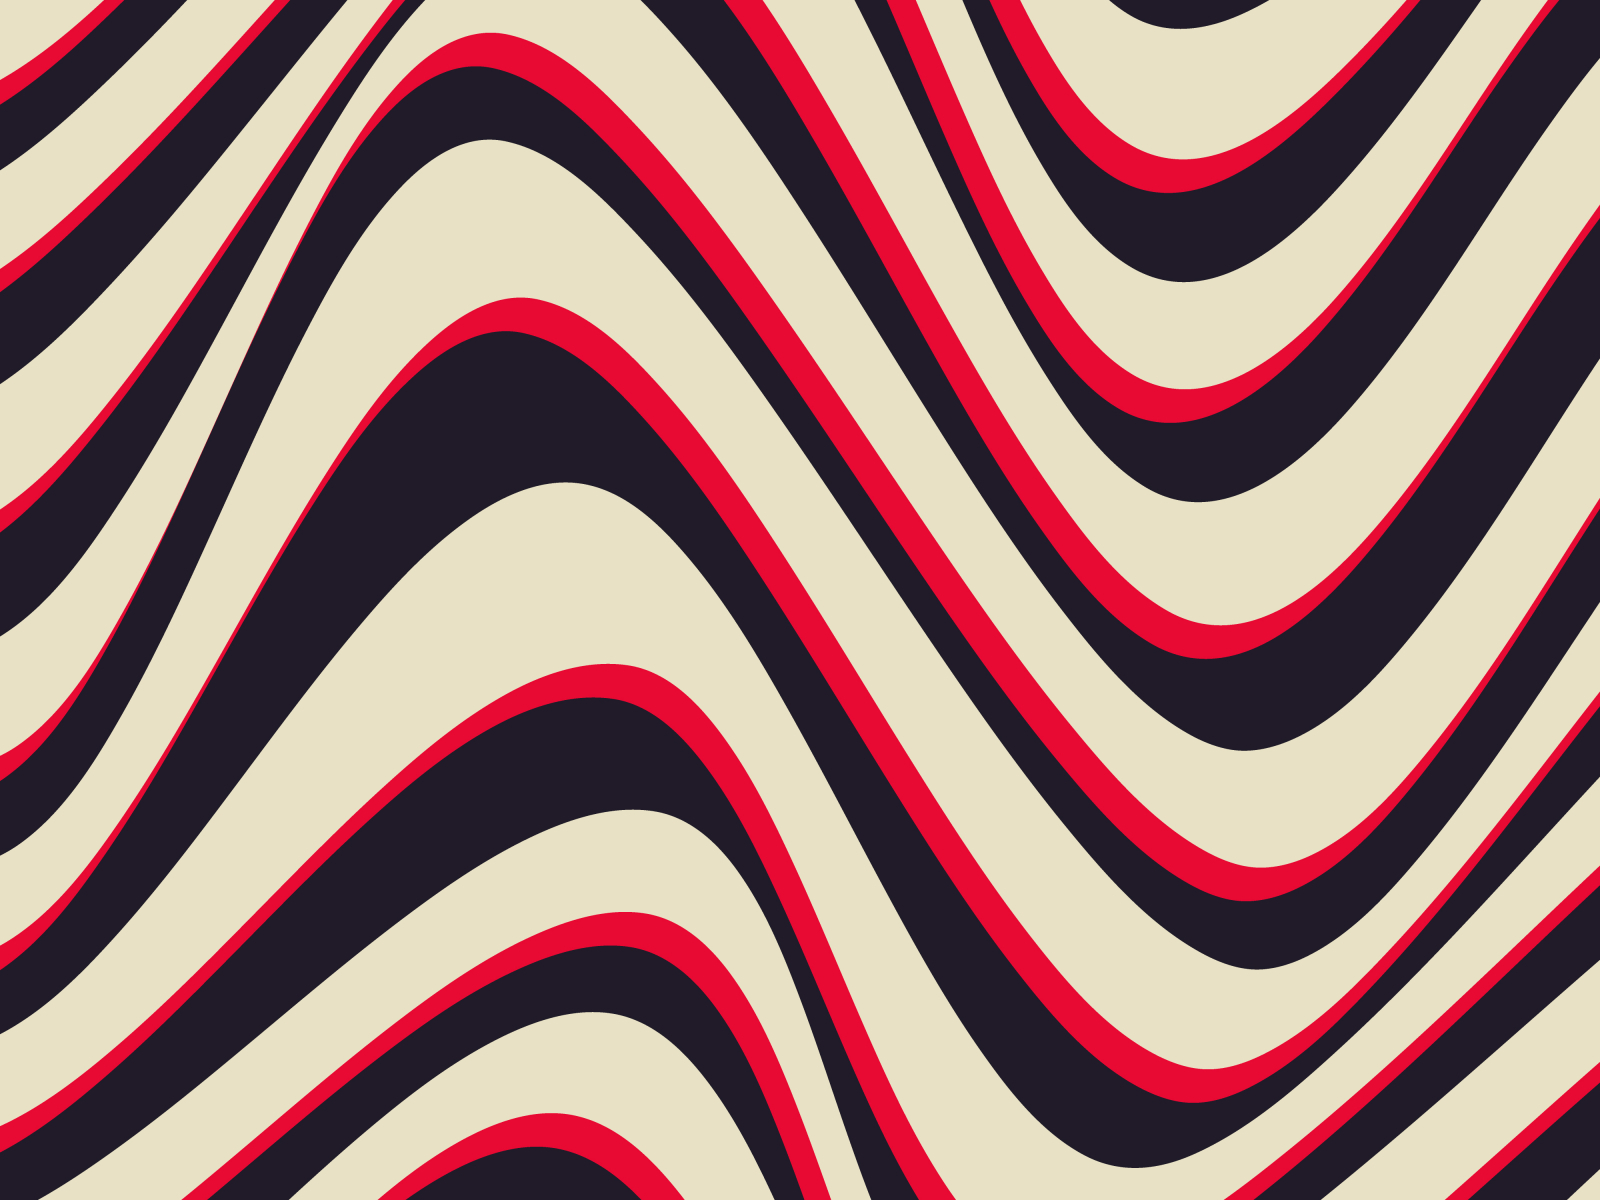 Wave abstract background by Neo Geometric 👁️ on Dribbble